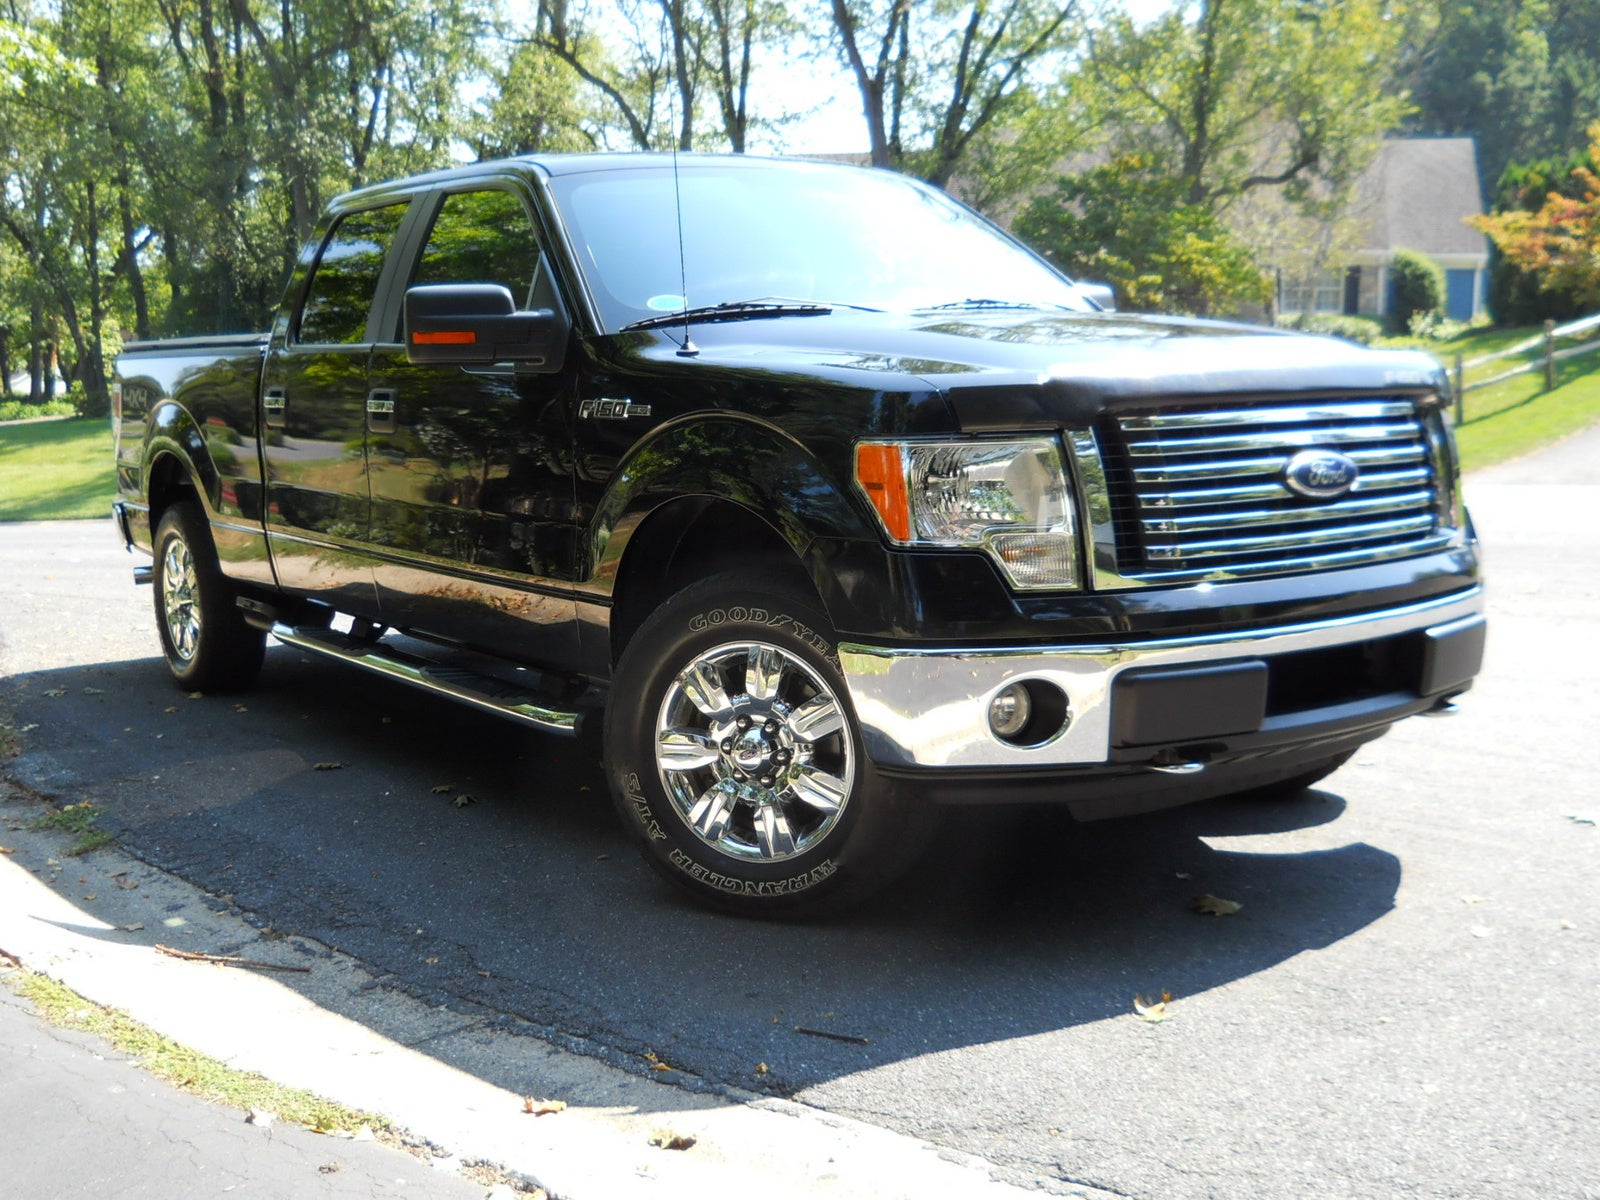 2010 Ford F-150 - Pictures - CarGurus
